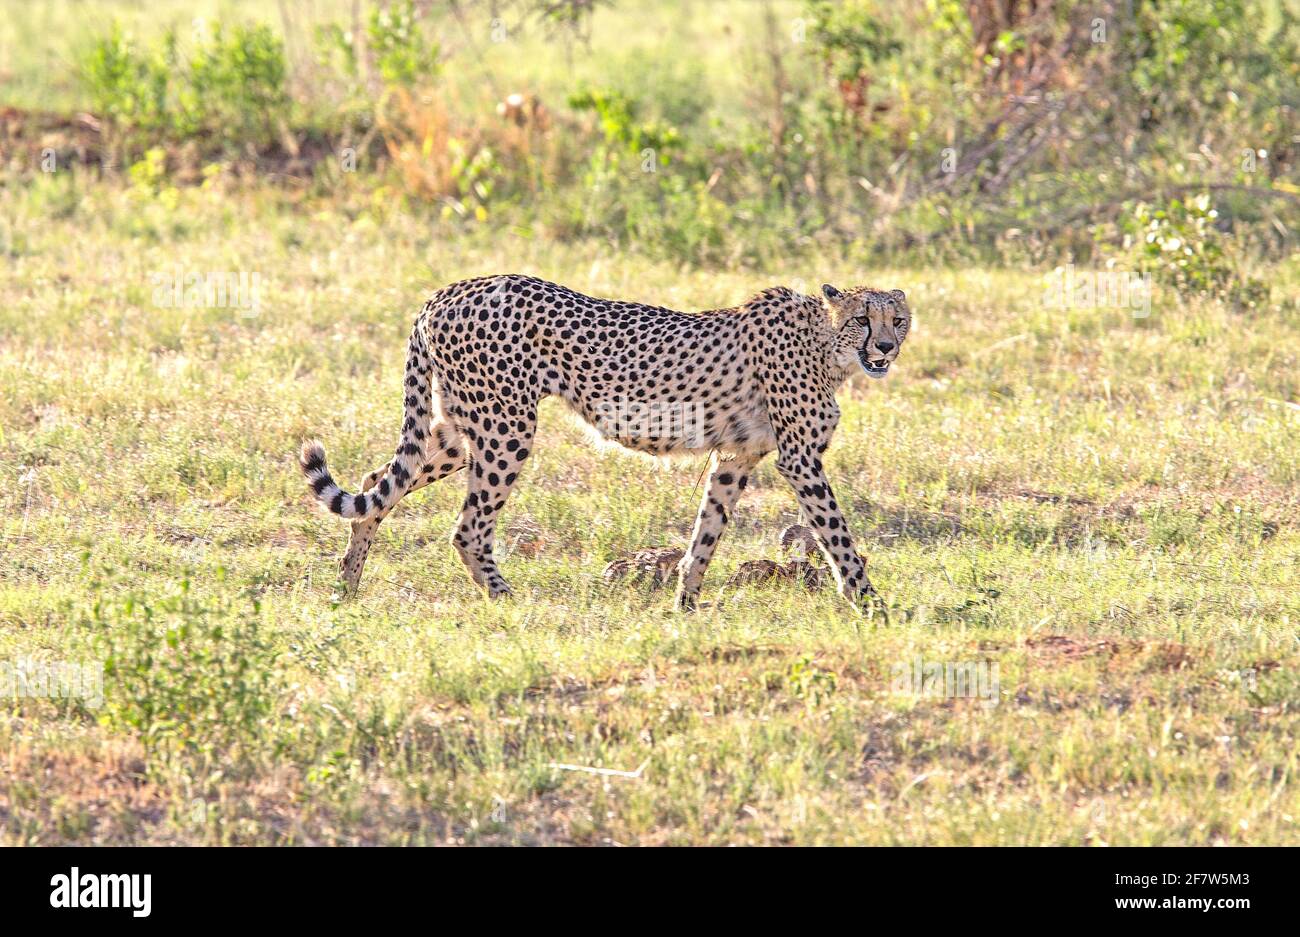 A Cheetah on the prowl Stock Photo